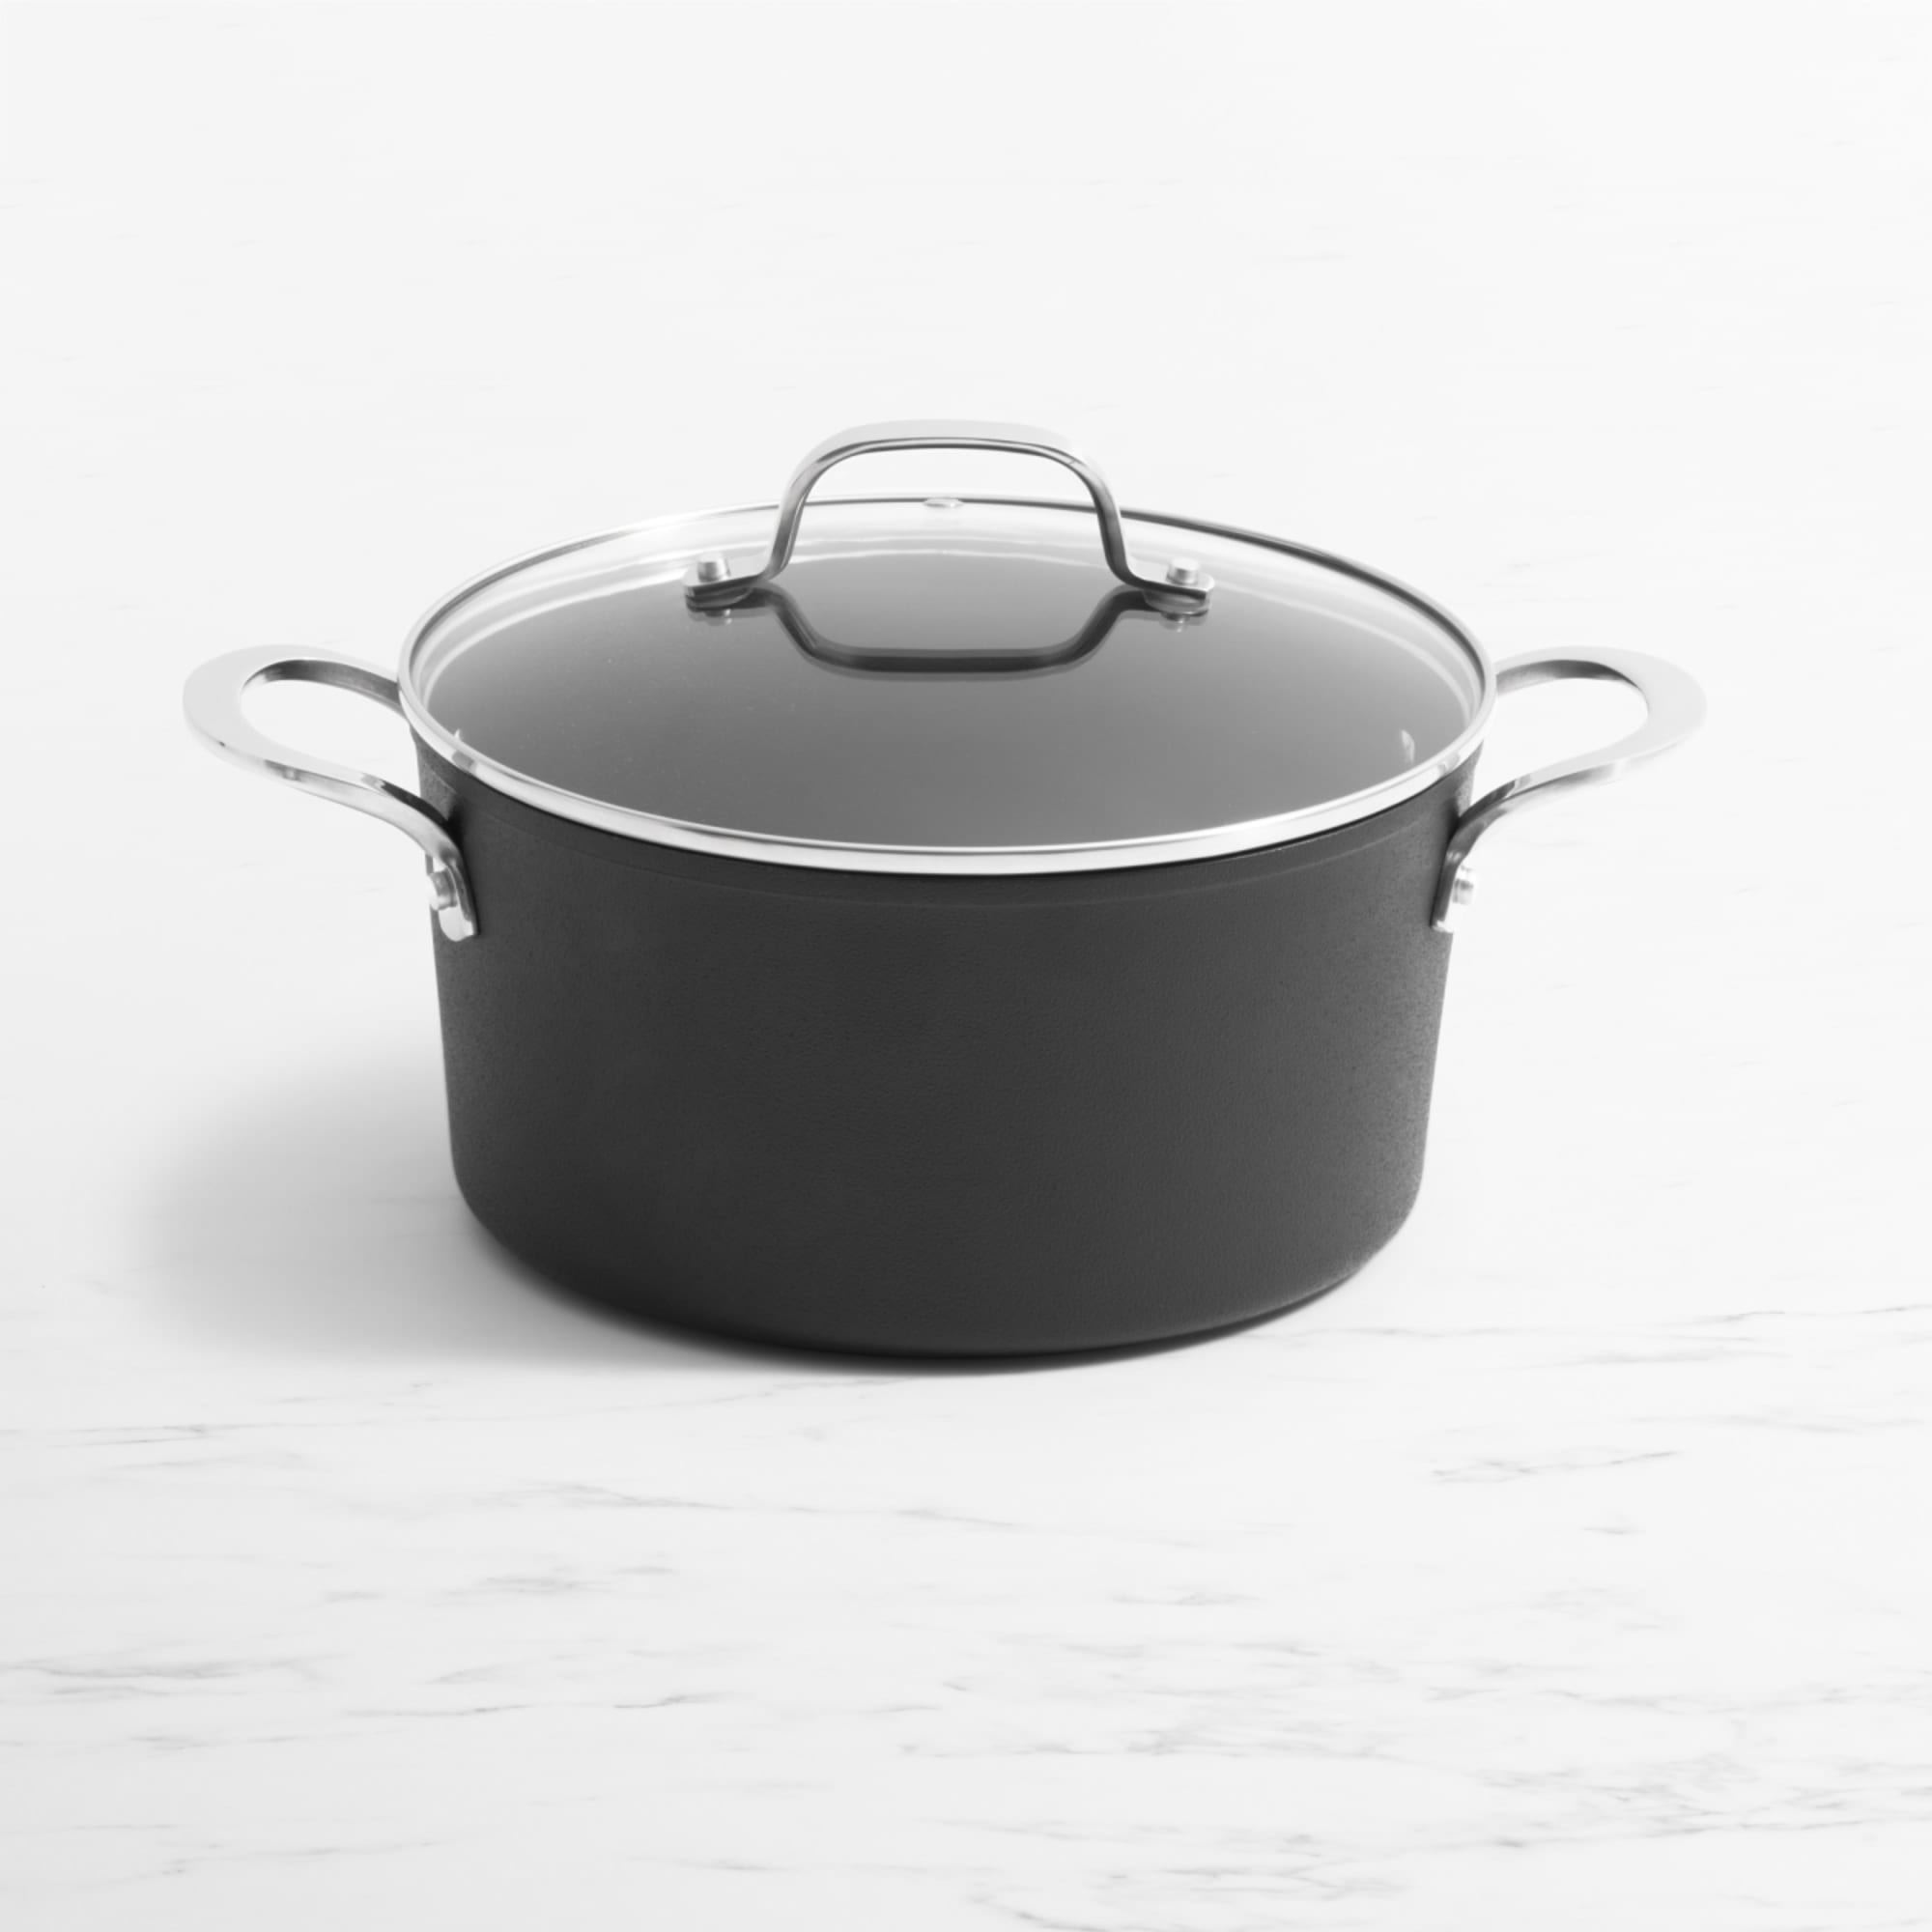 https://res.cloudinary.com/kitchenwarehouse/image/upload/c_fill,g_face,w_1250/f_auto/t_PDP_2000x2000/Kitchen%20Warehouse%20Images%20/Wolstead-Titan-Non-Stick-Casserole-24cm_1_Hero.jpg